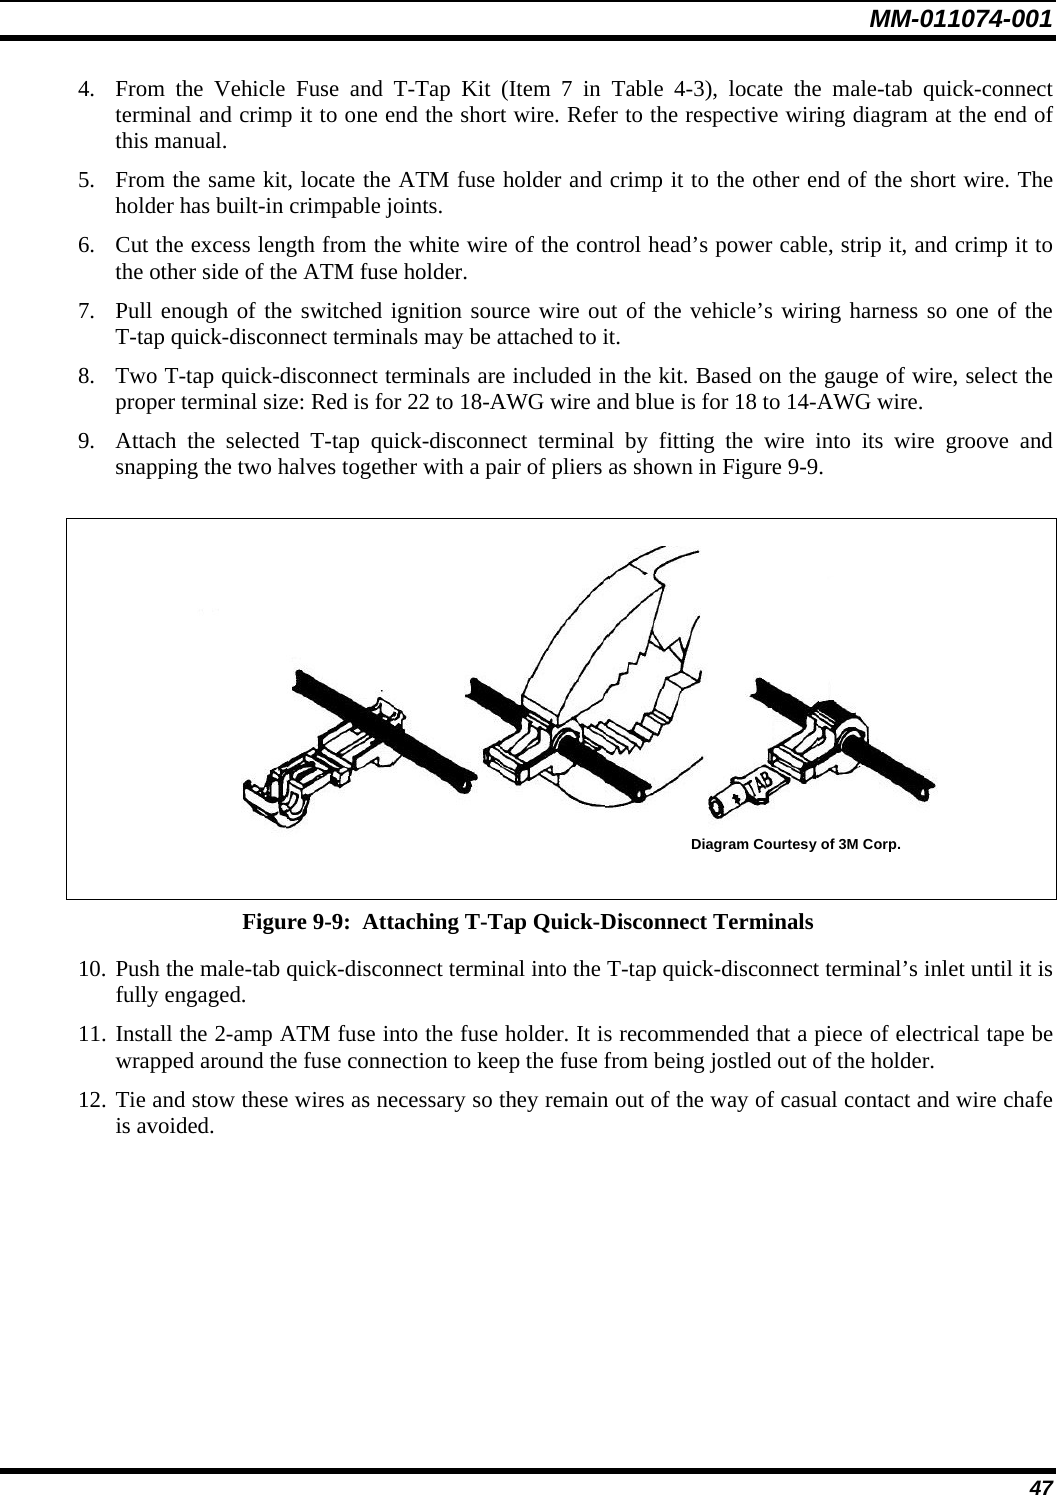 MM-011074-001 47 4. From the Vehicle Fuse and T-Tap Kit (Item 7 in Table 4-3), locate the male-tab quick-connect terminal and crimp it to one end the short wire. Refer to the respective wiring diagram at the end of this manual. 5. From the same kit, locate the ATM fuse holder and crimp it to the other end of the short wire. The holder has built-in crimpable joints. 6. Cut the excess length from the white wire of the control head’s power cable, strip it, and crimp it to the other side of the ATM fuse holder. 7. Pull enough of the switched ignition source wire out of the vehicle’s wiring harness so one of the T-tap quick-disconnect terminals may be attached to it. 8. Two T-tap quick-disconnect terminals are included in the kit. Based on the gauge of wire, select the proper terminal size: Red is for 22 to 18-AWG wire and blue is for 18 to 14-AWG wire. 9. Attach the selected T-tap quick-disconnect terminal by fitting the wire into its wire groove and snapping the two halves together with a pair of pliers as shown in Figure 9-9.   Diagram Courtesy of 3M Corp.   Figure 9-9:  Attaching T-Tap Quick-Disconnect Terminals 10. Push the male-tab quick-disconnect terminal into the T-tap quick-disconnect terminal’s inlet until it is fully engaged. 11. Install the 2-amp ATM fuse into the fuse holder. It is recommended that a piece of electrical tape be wrapped around the fuse connection to keep the fuse from being jostled out of the holder. 12. Tie and stow these wires as necessary so they remain out of the way of casual contact and wire chafe is avoided. 